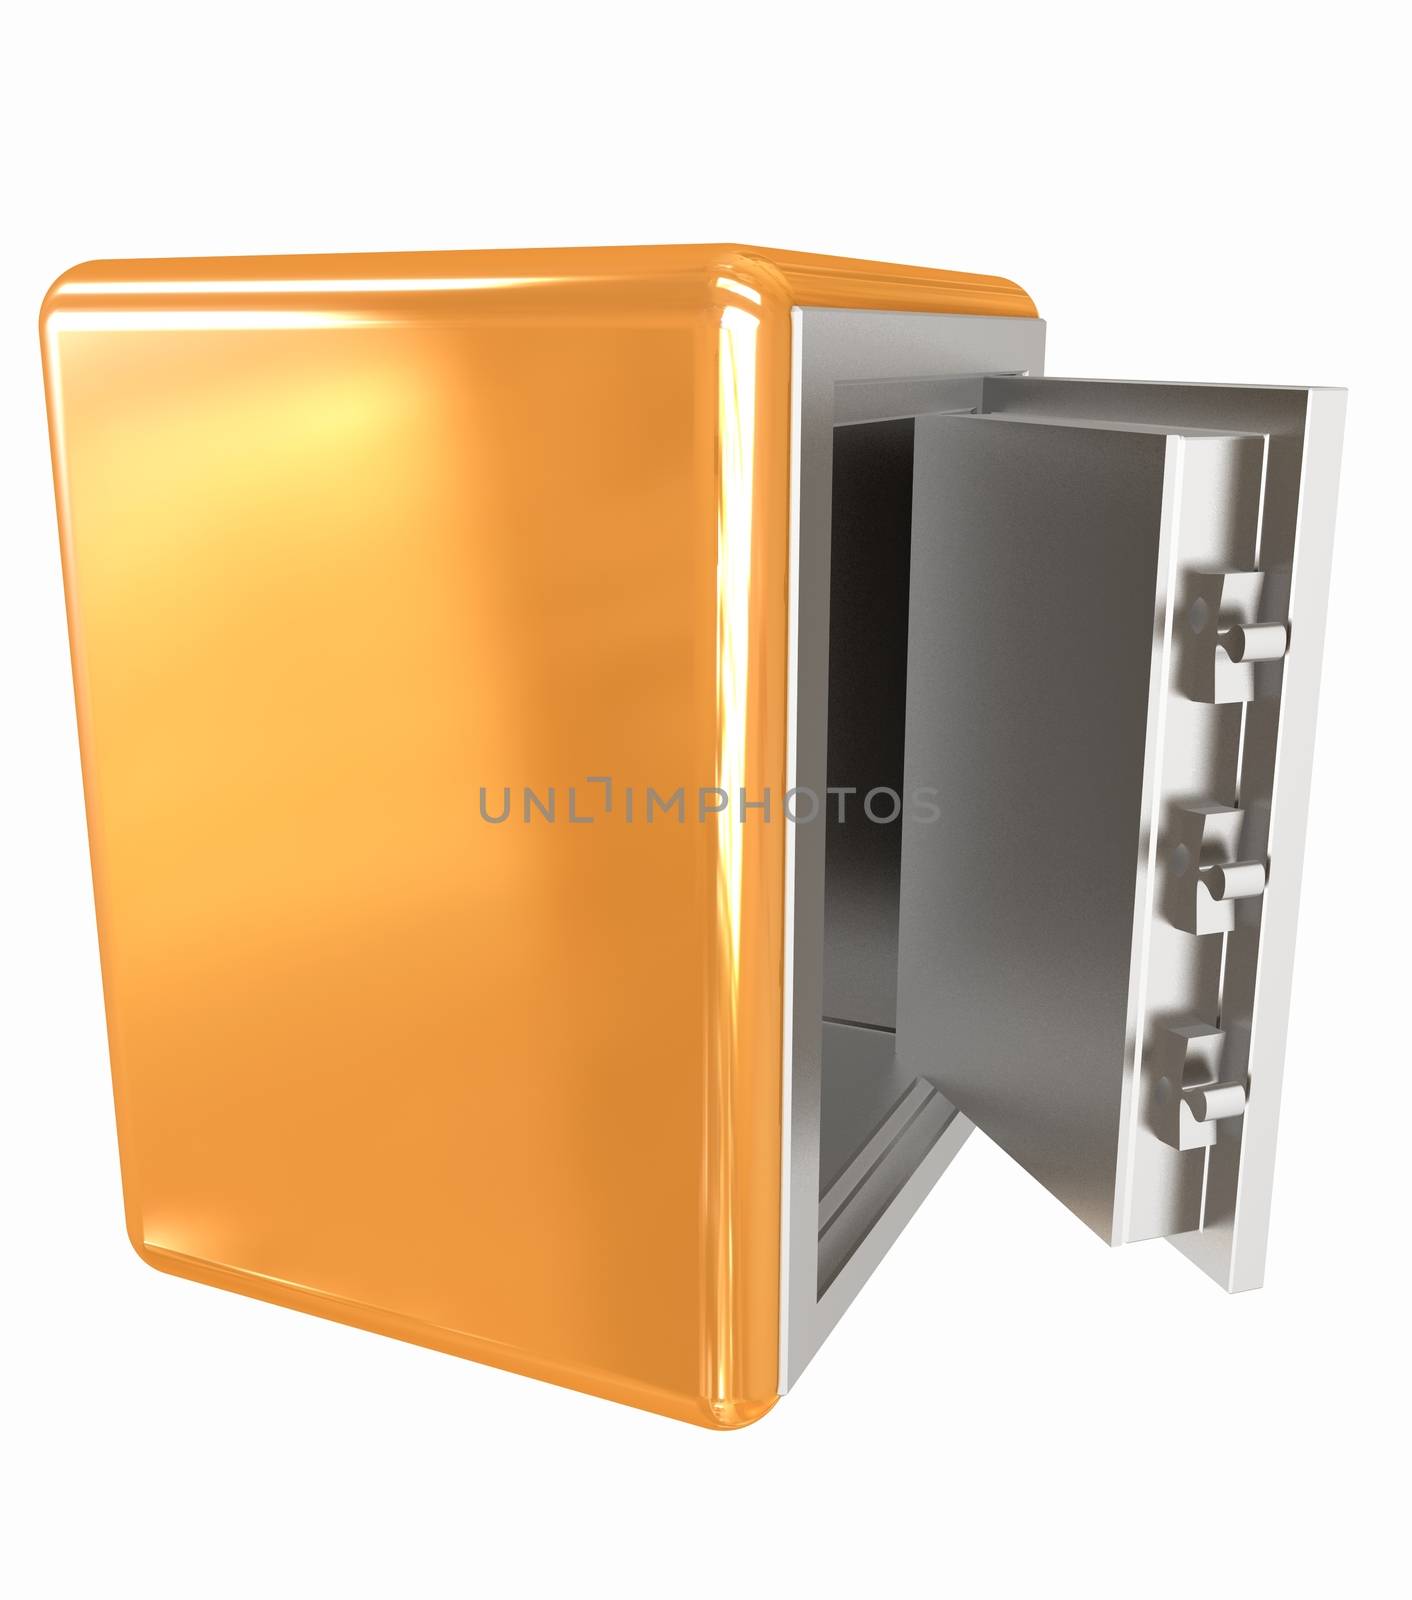 Security metal safe with empty space inside  by Guru3D